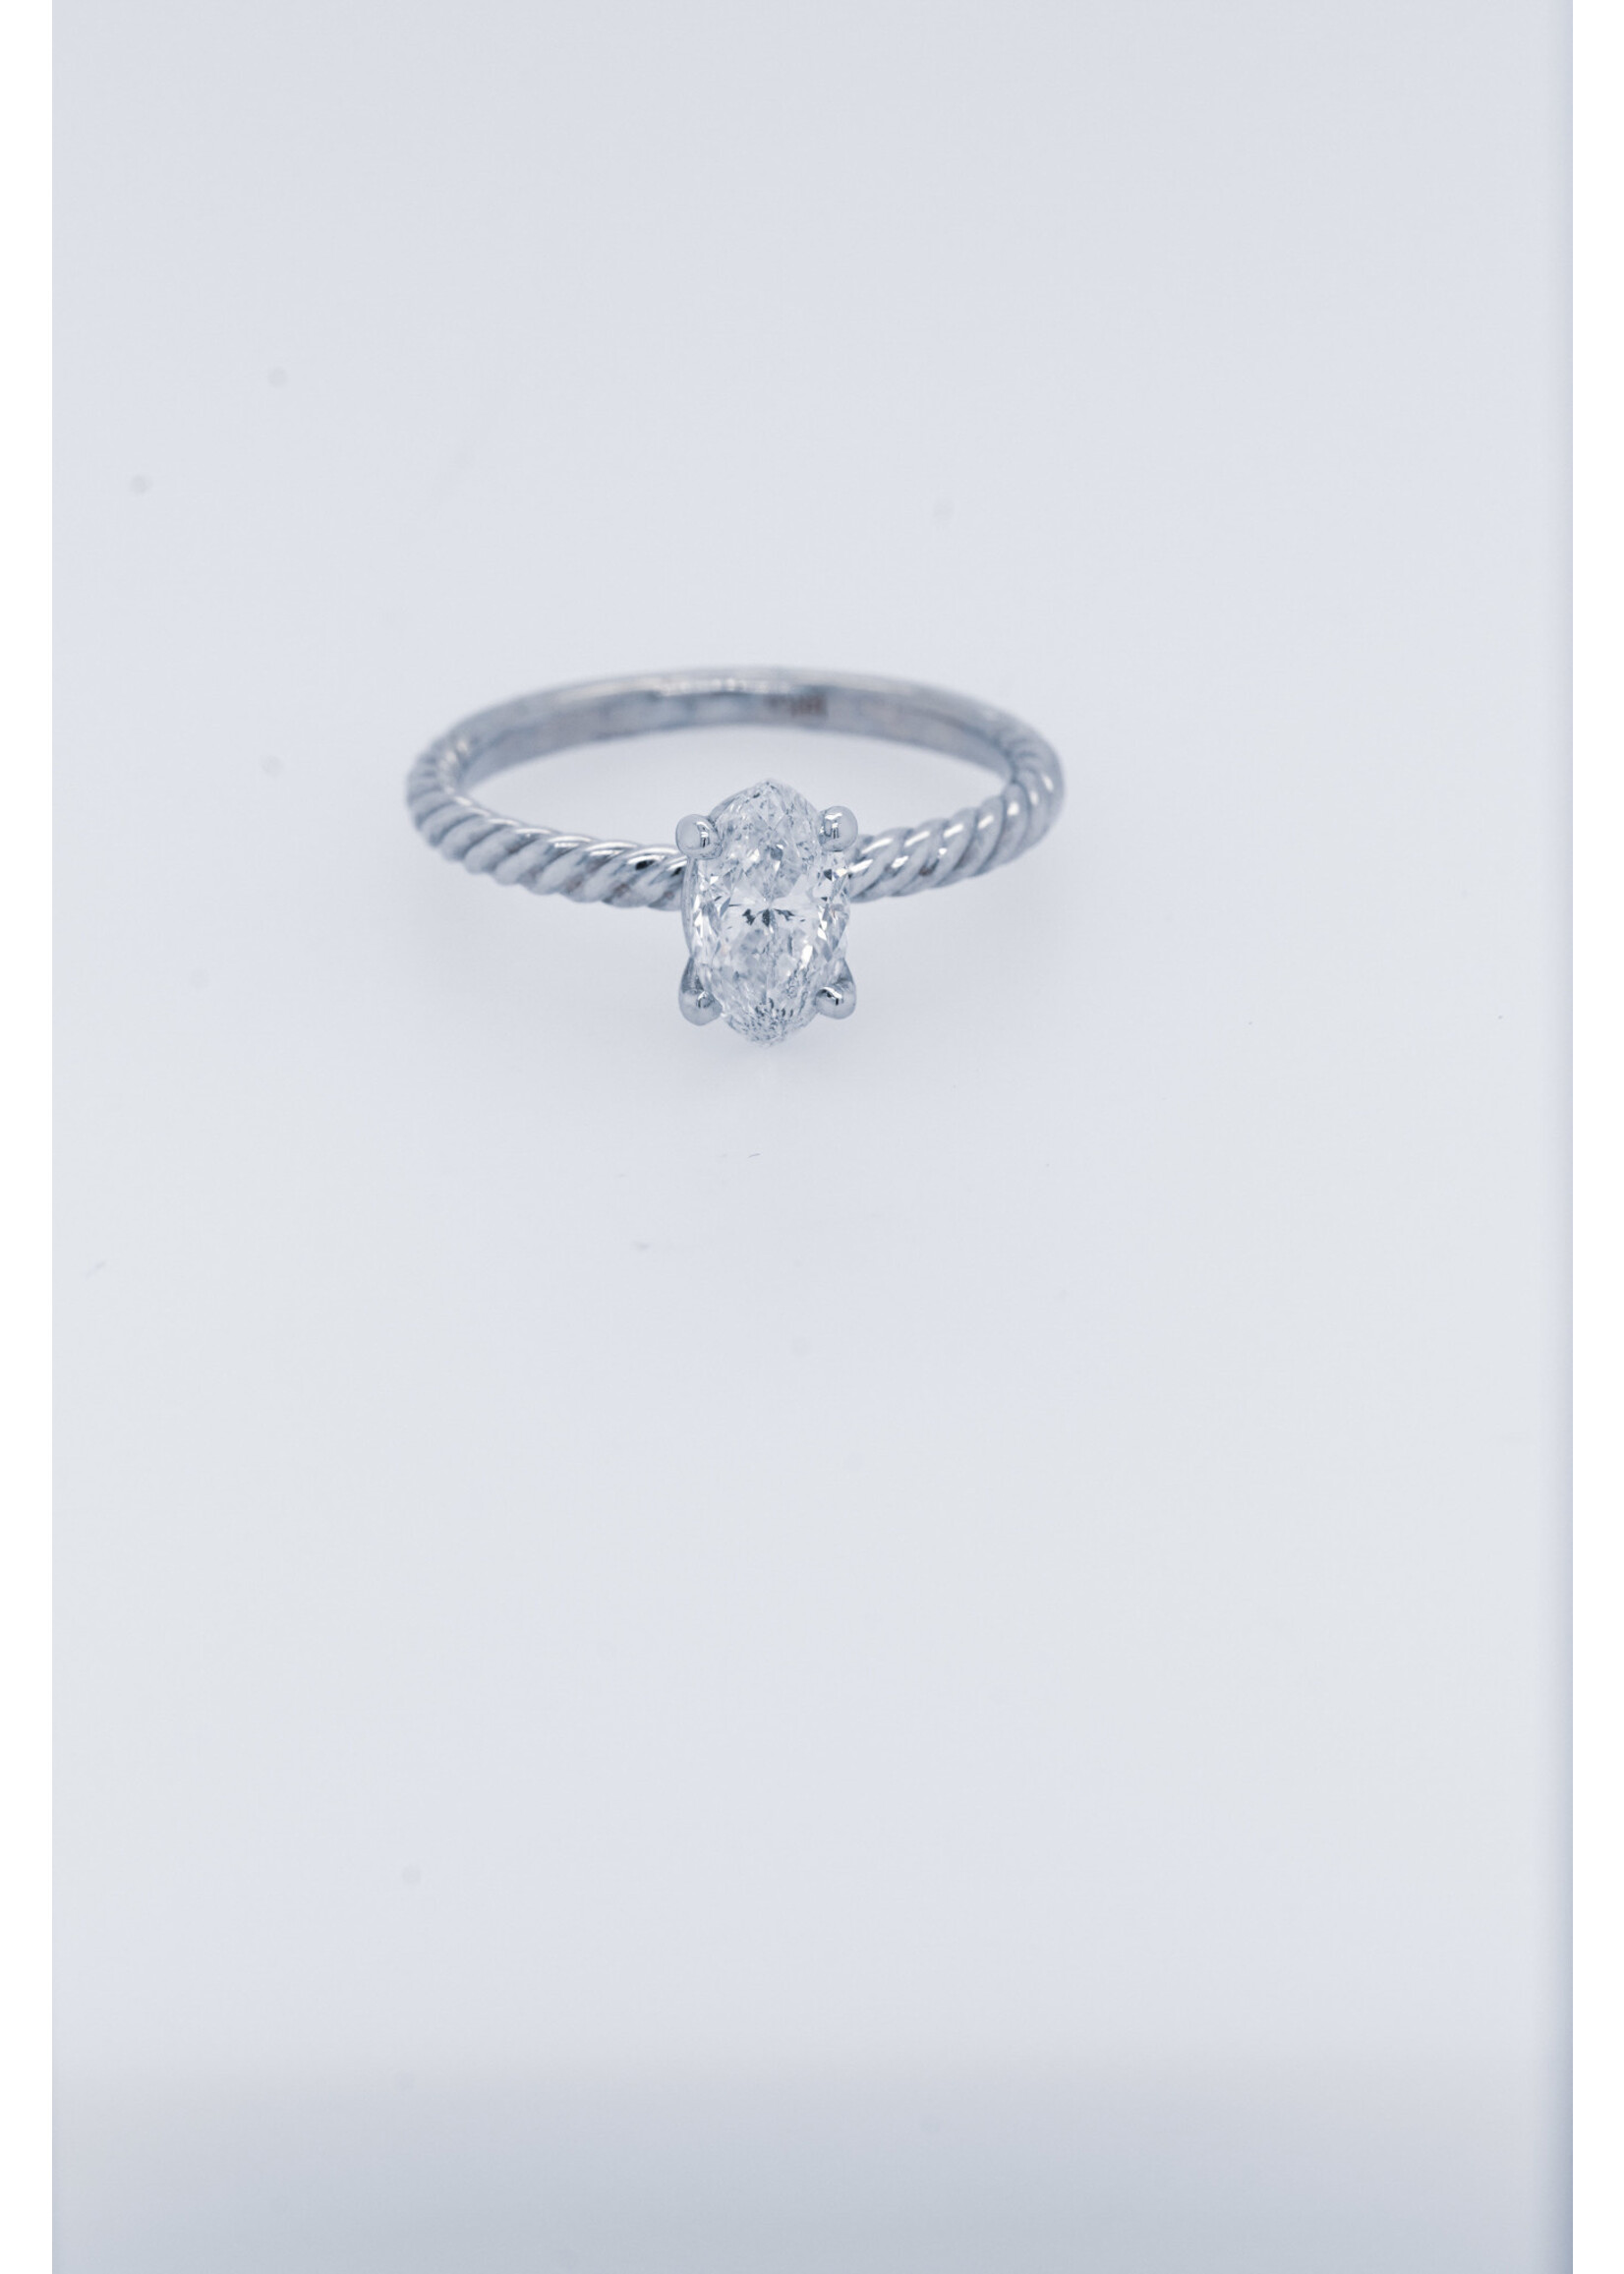 14KW 2.00g 1.02ct E/I1 Moval Cut Diamond Twist Solitaire Ring (size 7)